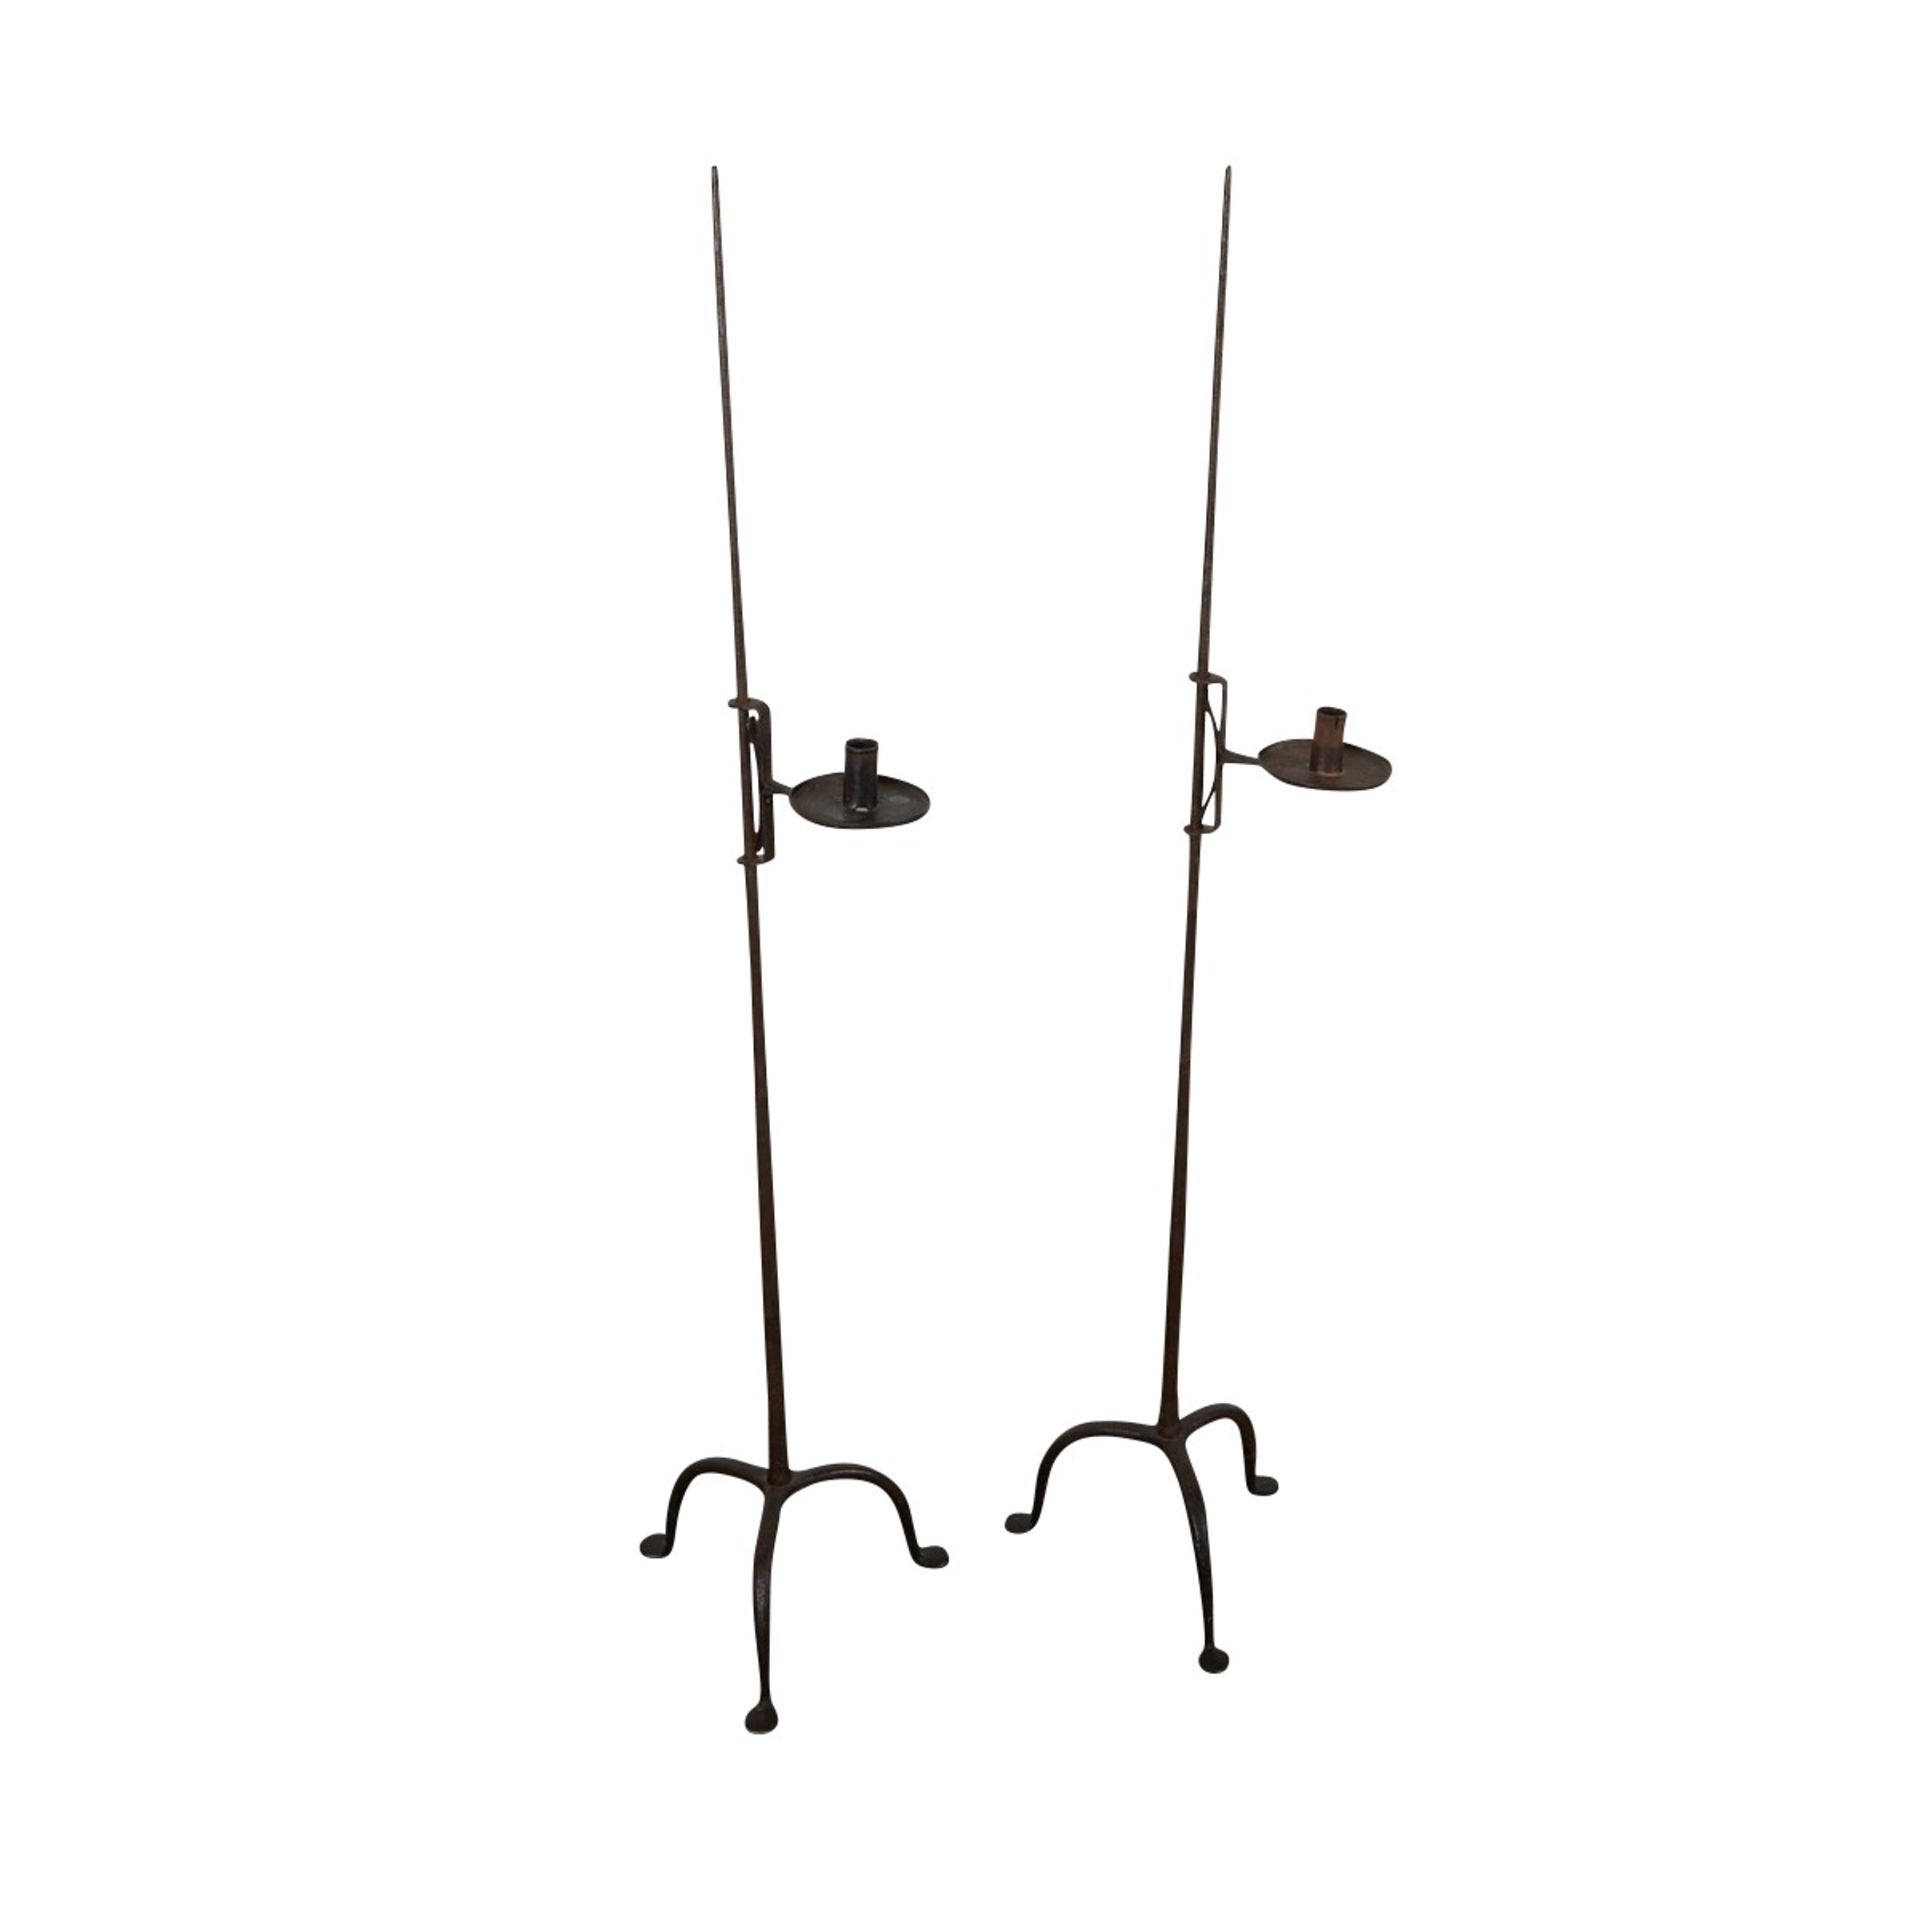 Pair of Wrought Iron Candle Stands - Image 5 of 7